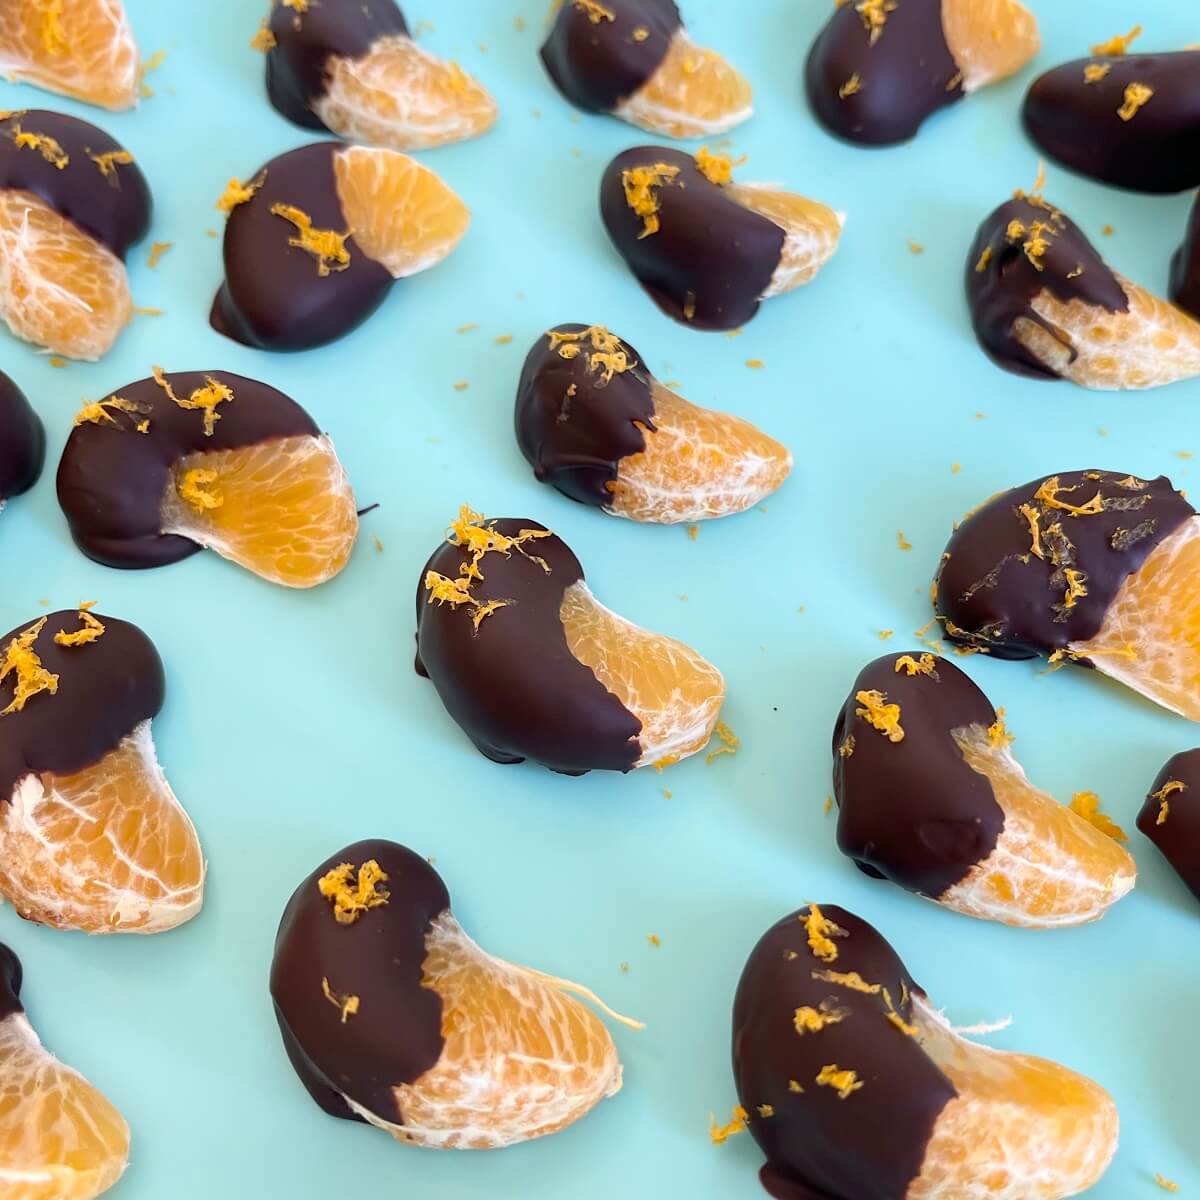 Chilled chocolate dipped clementine segments on a silicone baking mat.